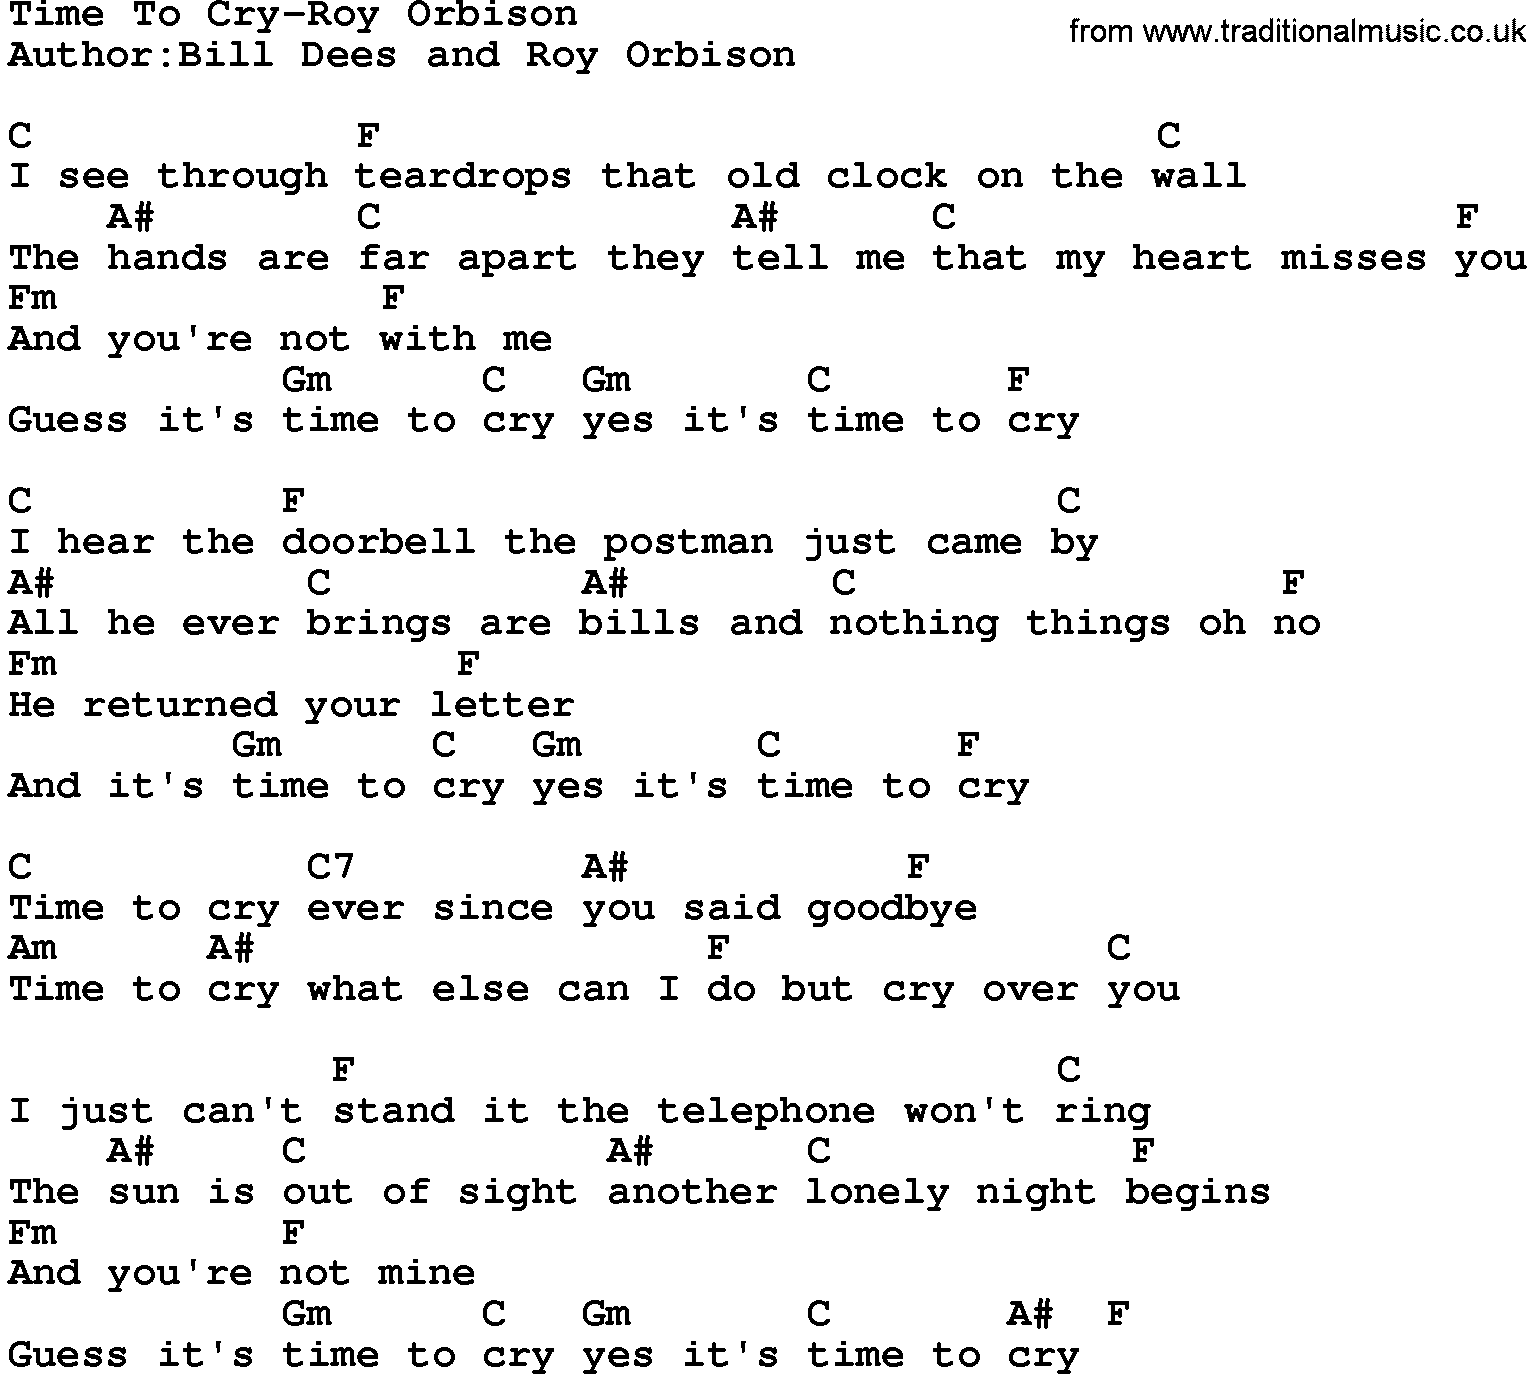 Country music song: Time To Cry-Roy Orbison lyrics and chords